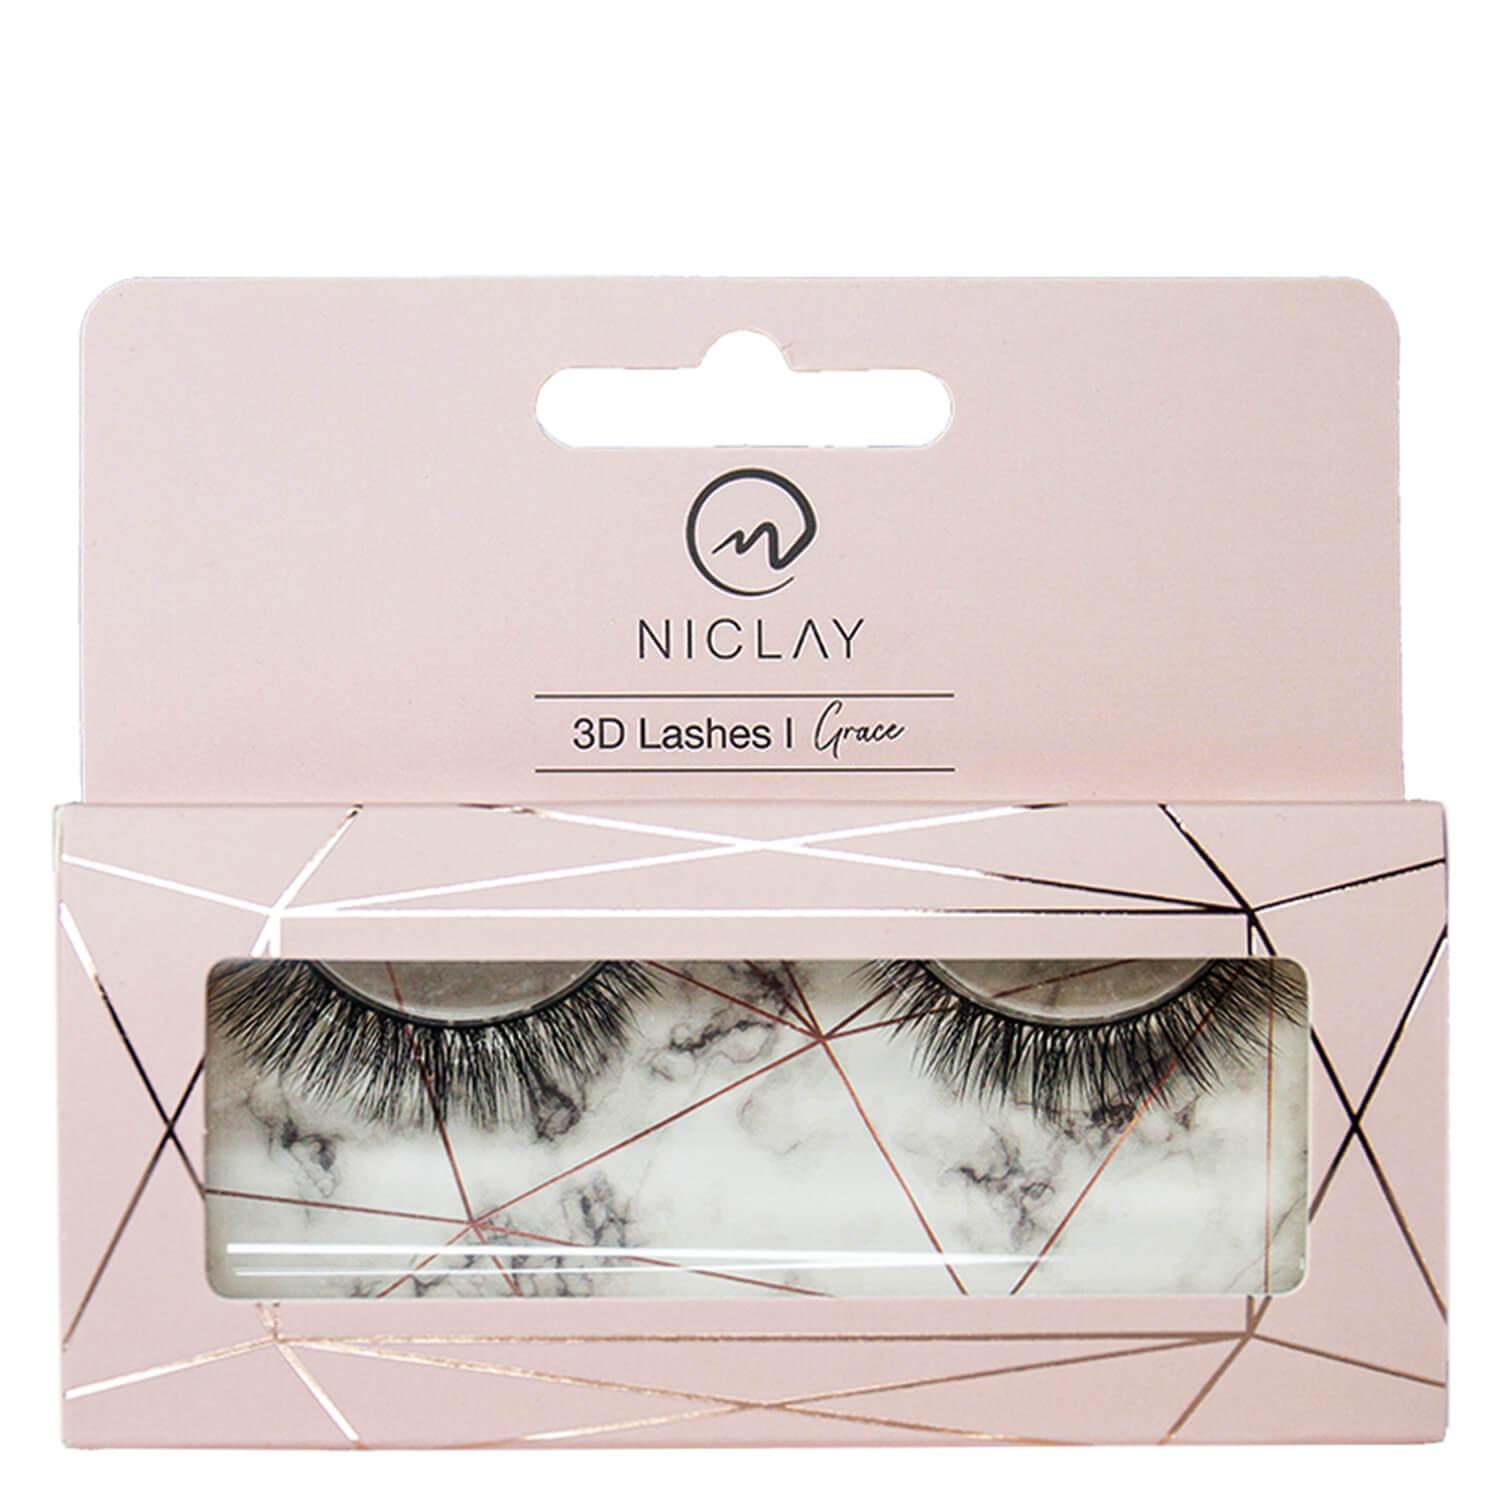 NICLAY - 3D Lashes Grace